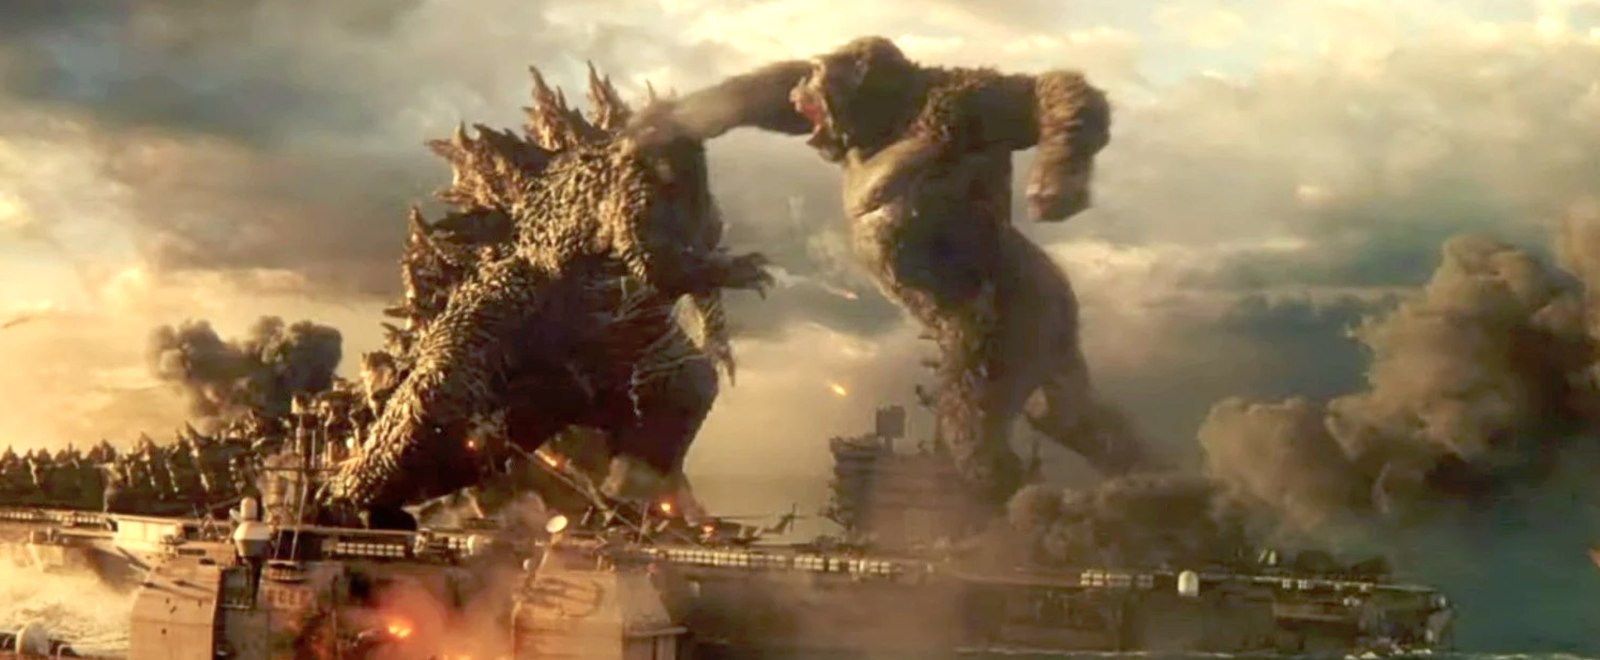 The ‘Godzilla Vs. Kong’ Director Has Known For 30 Years Who He Thinks Should Win